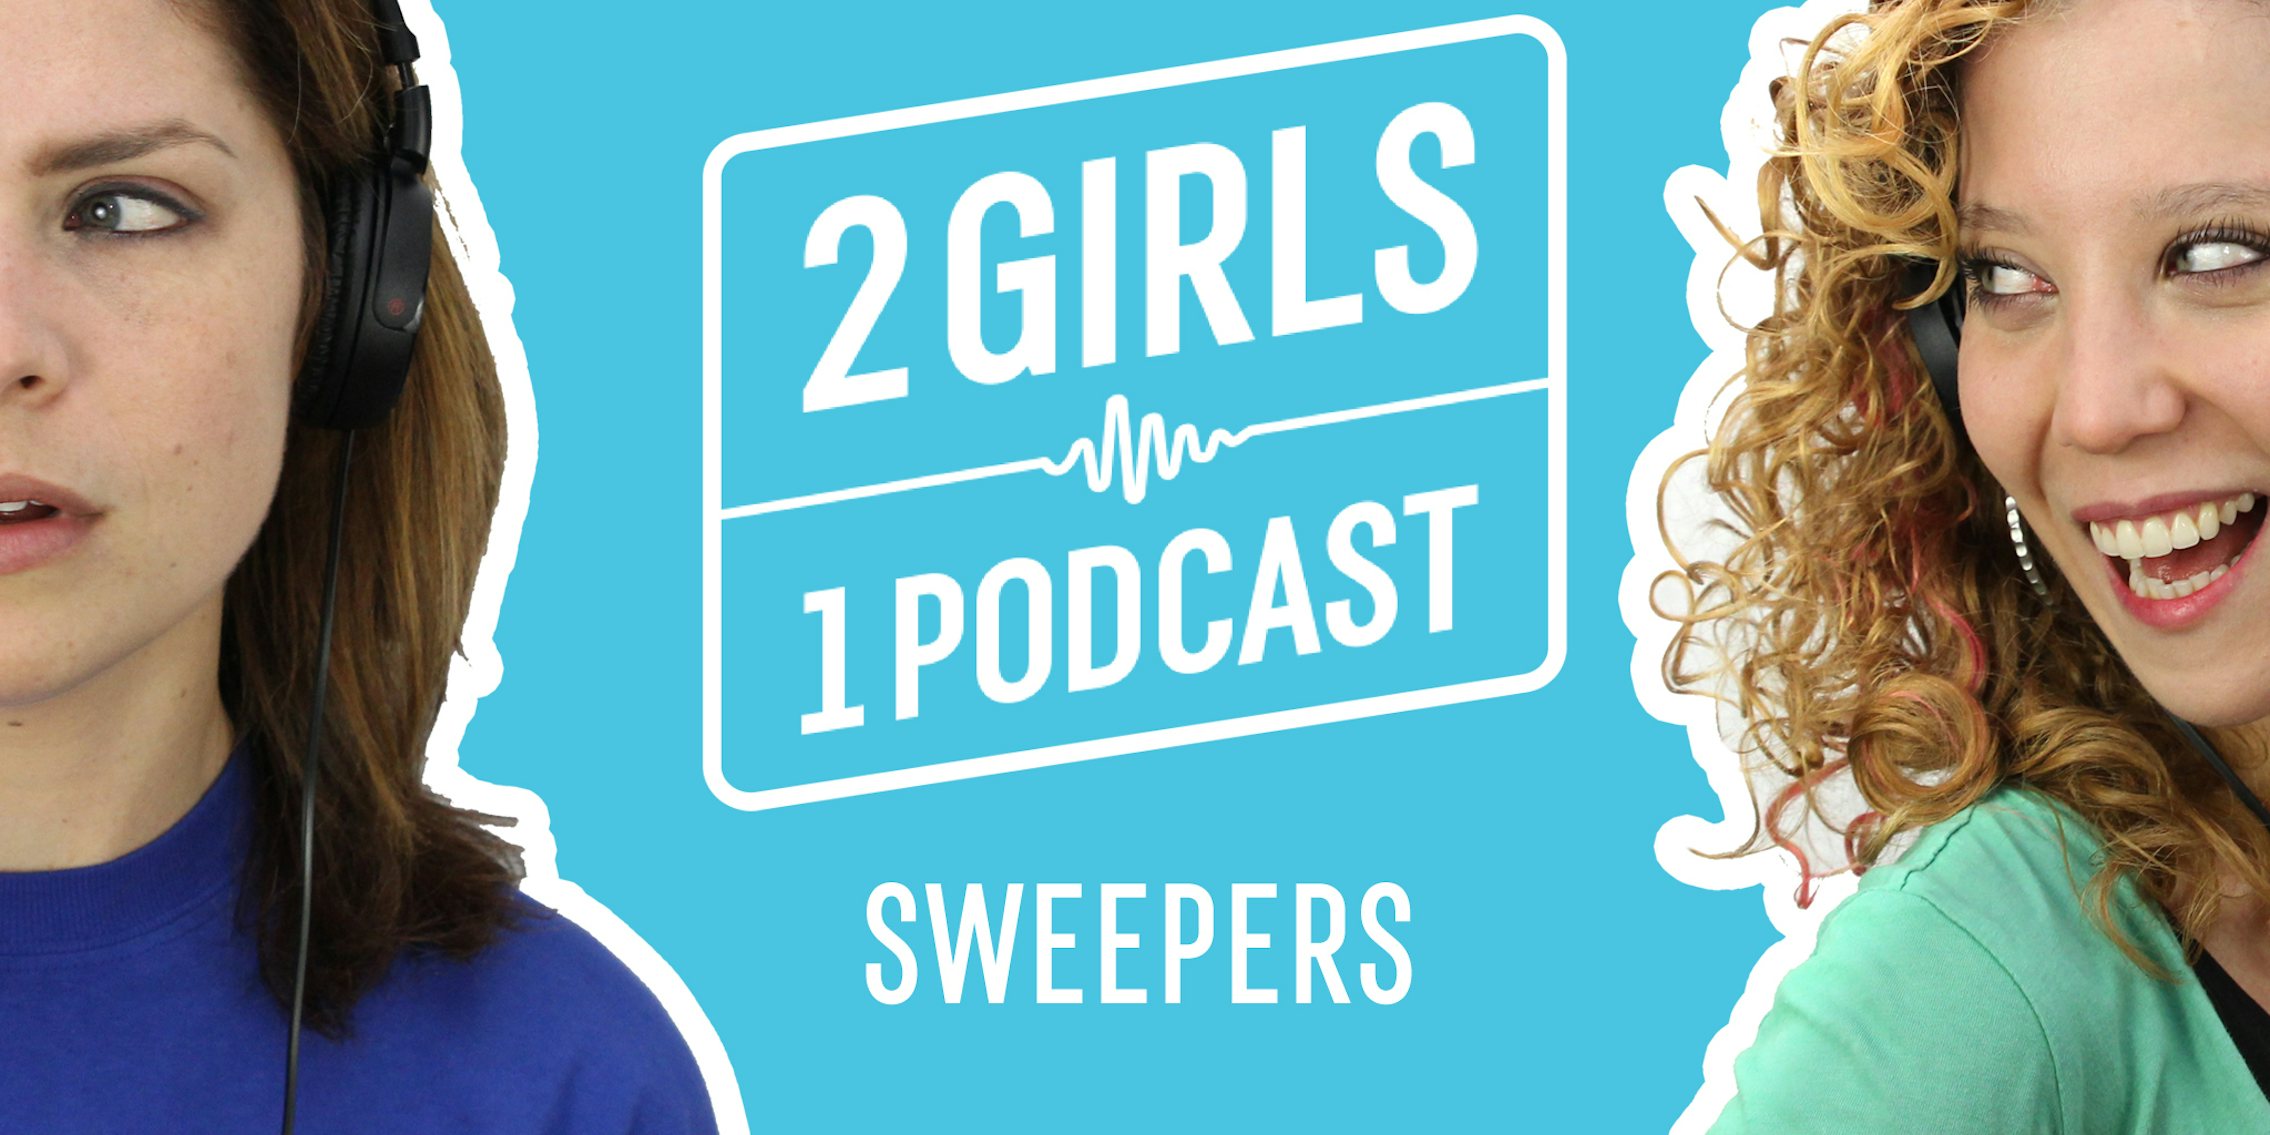 2 Girls 1 Podcast SWEEPERS